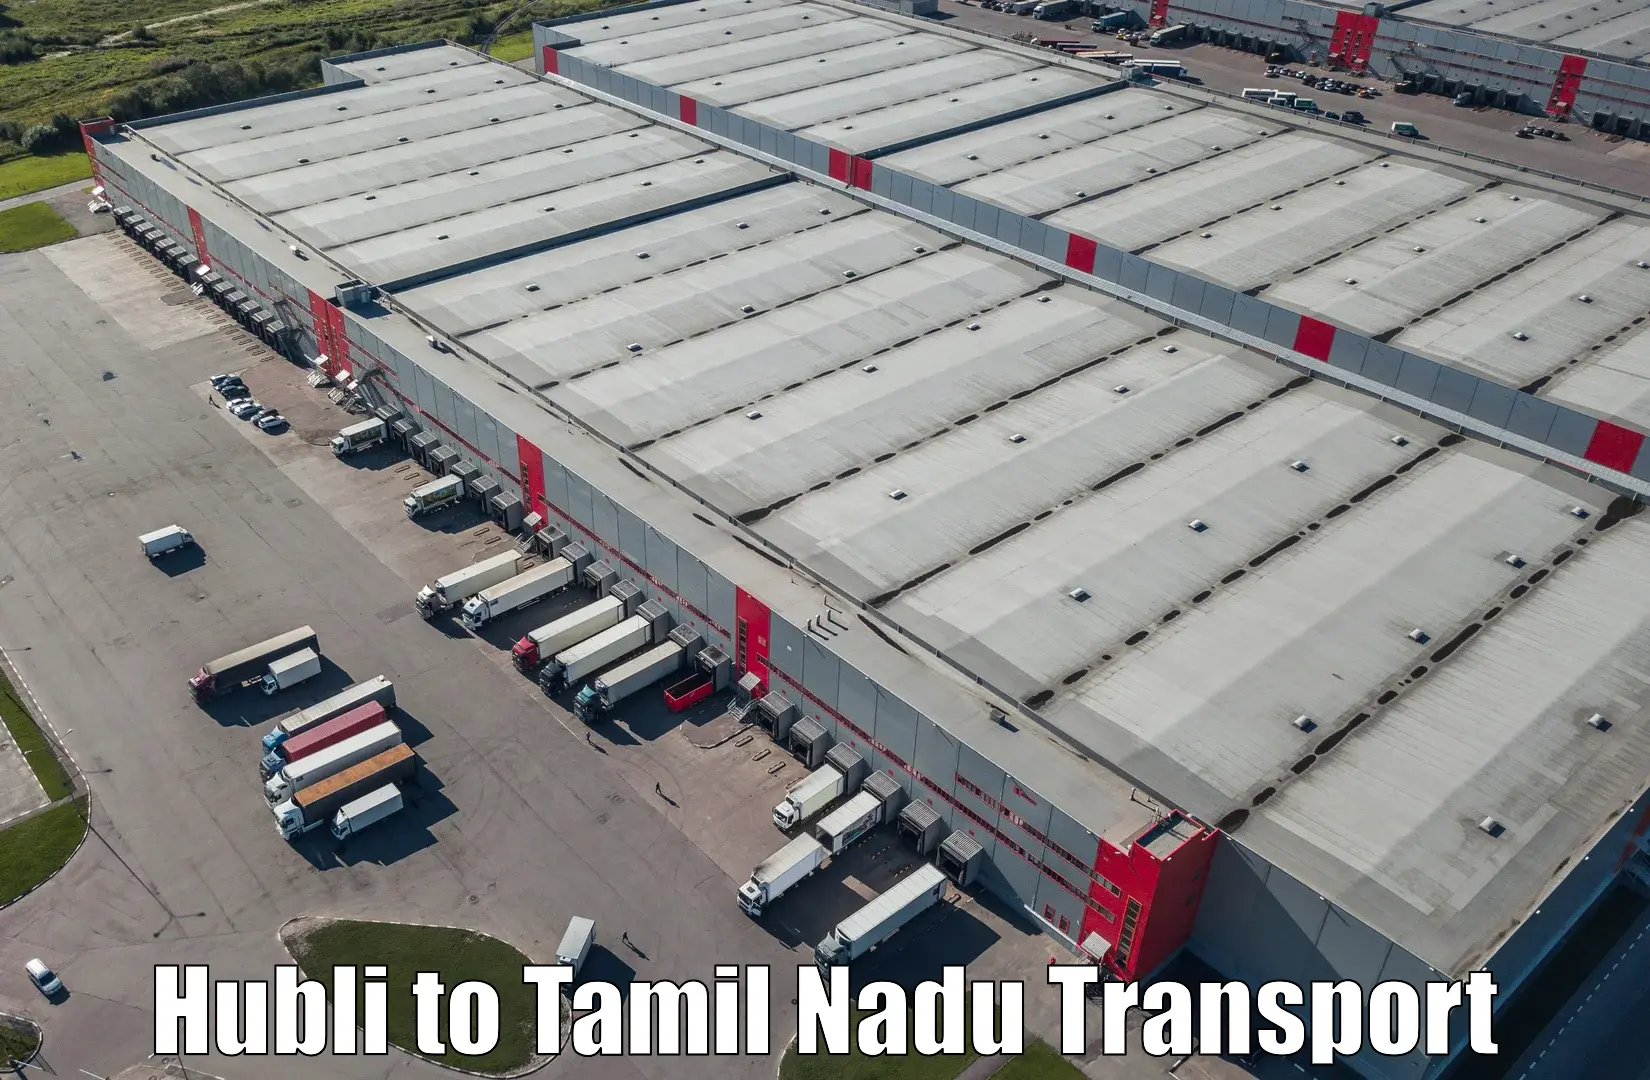 Lorry transport service Hubli to Nagercoil